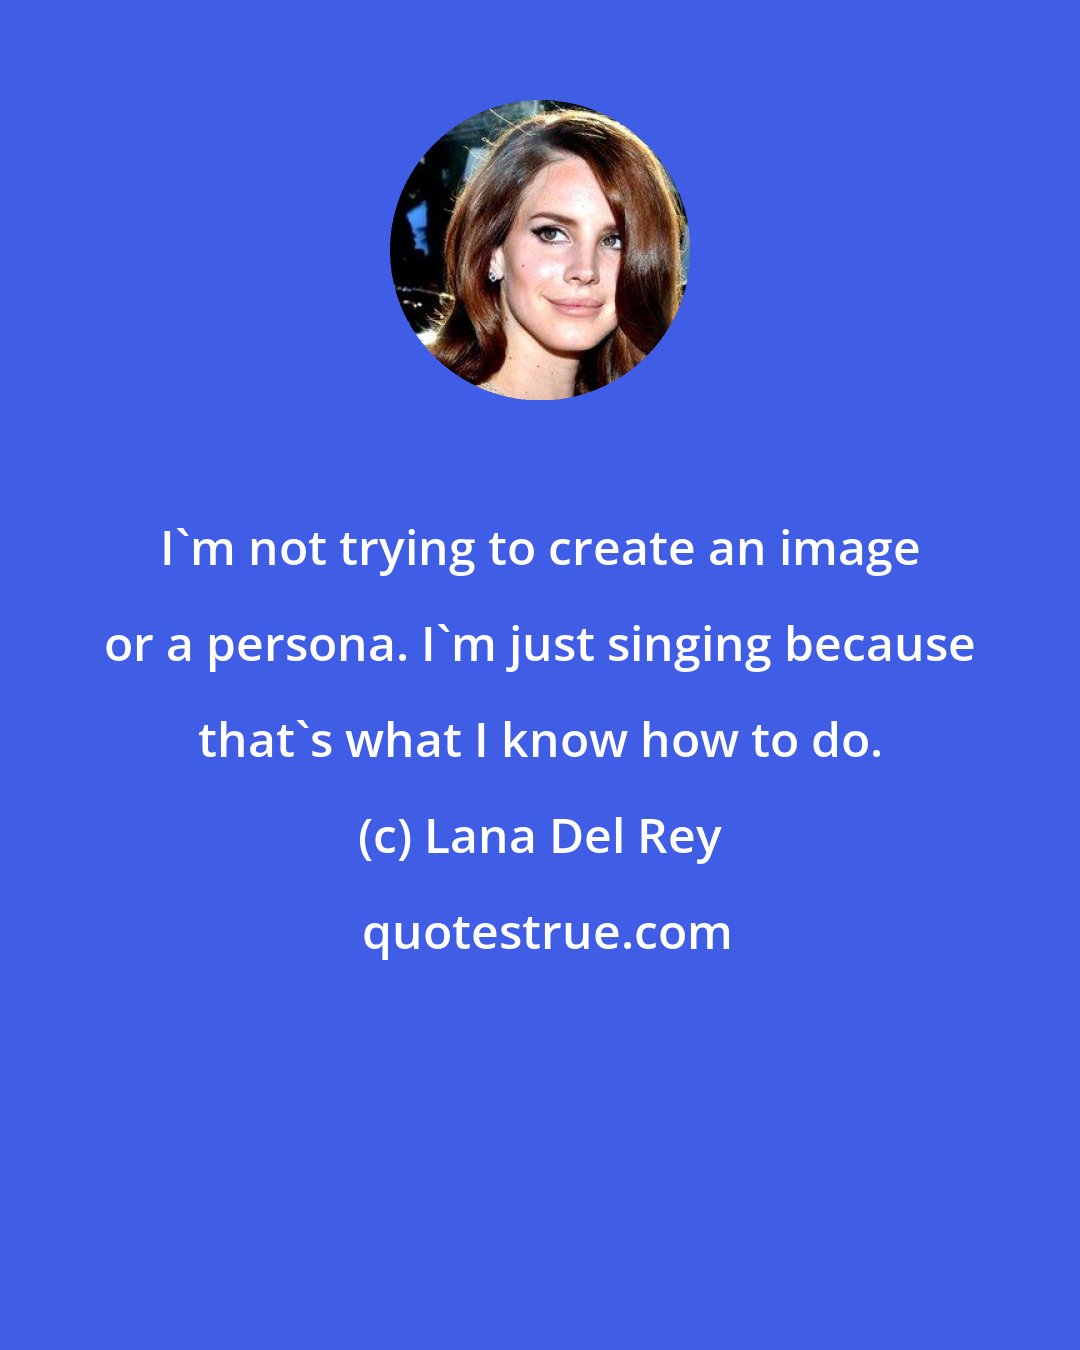 Lana Del Rey: I'm not trying to create an image or a persona. I'm just singing because that's what I know how to do.